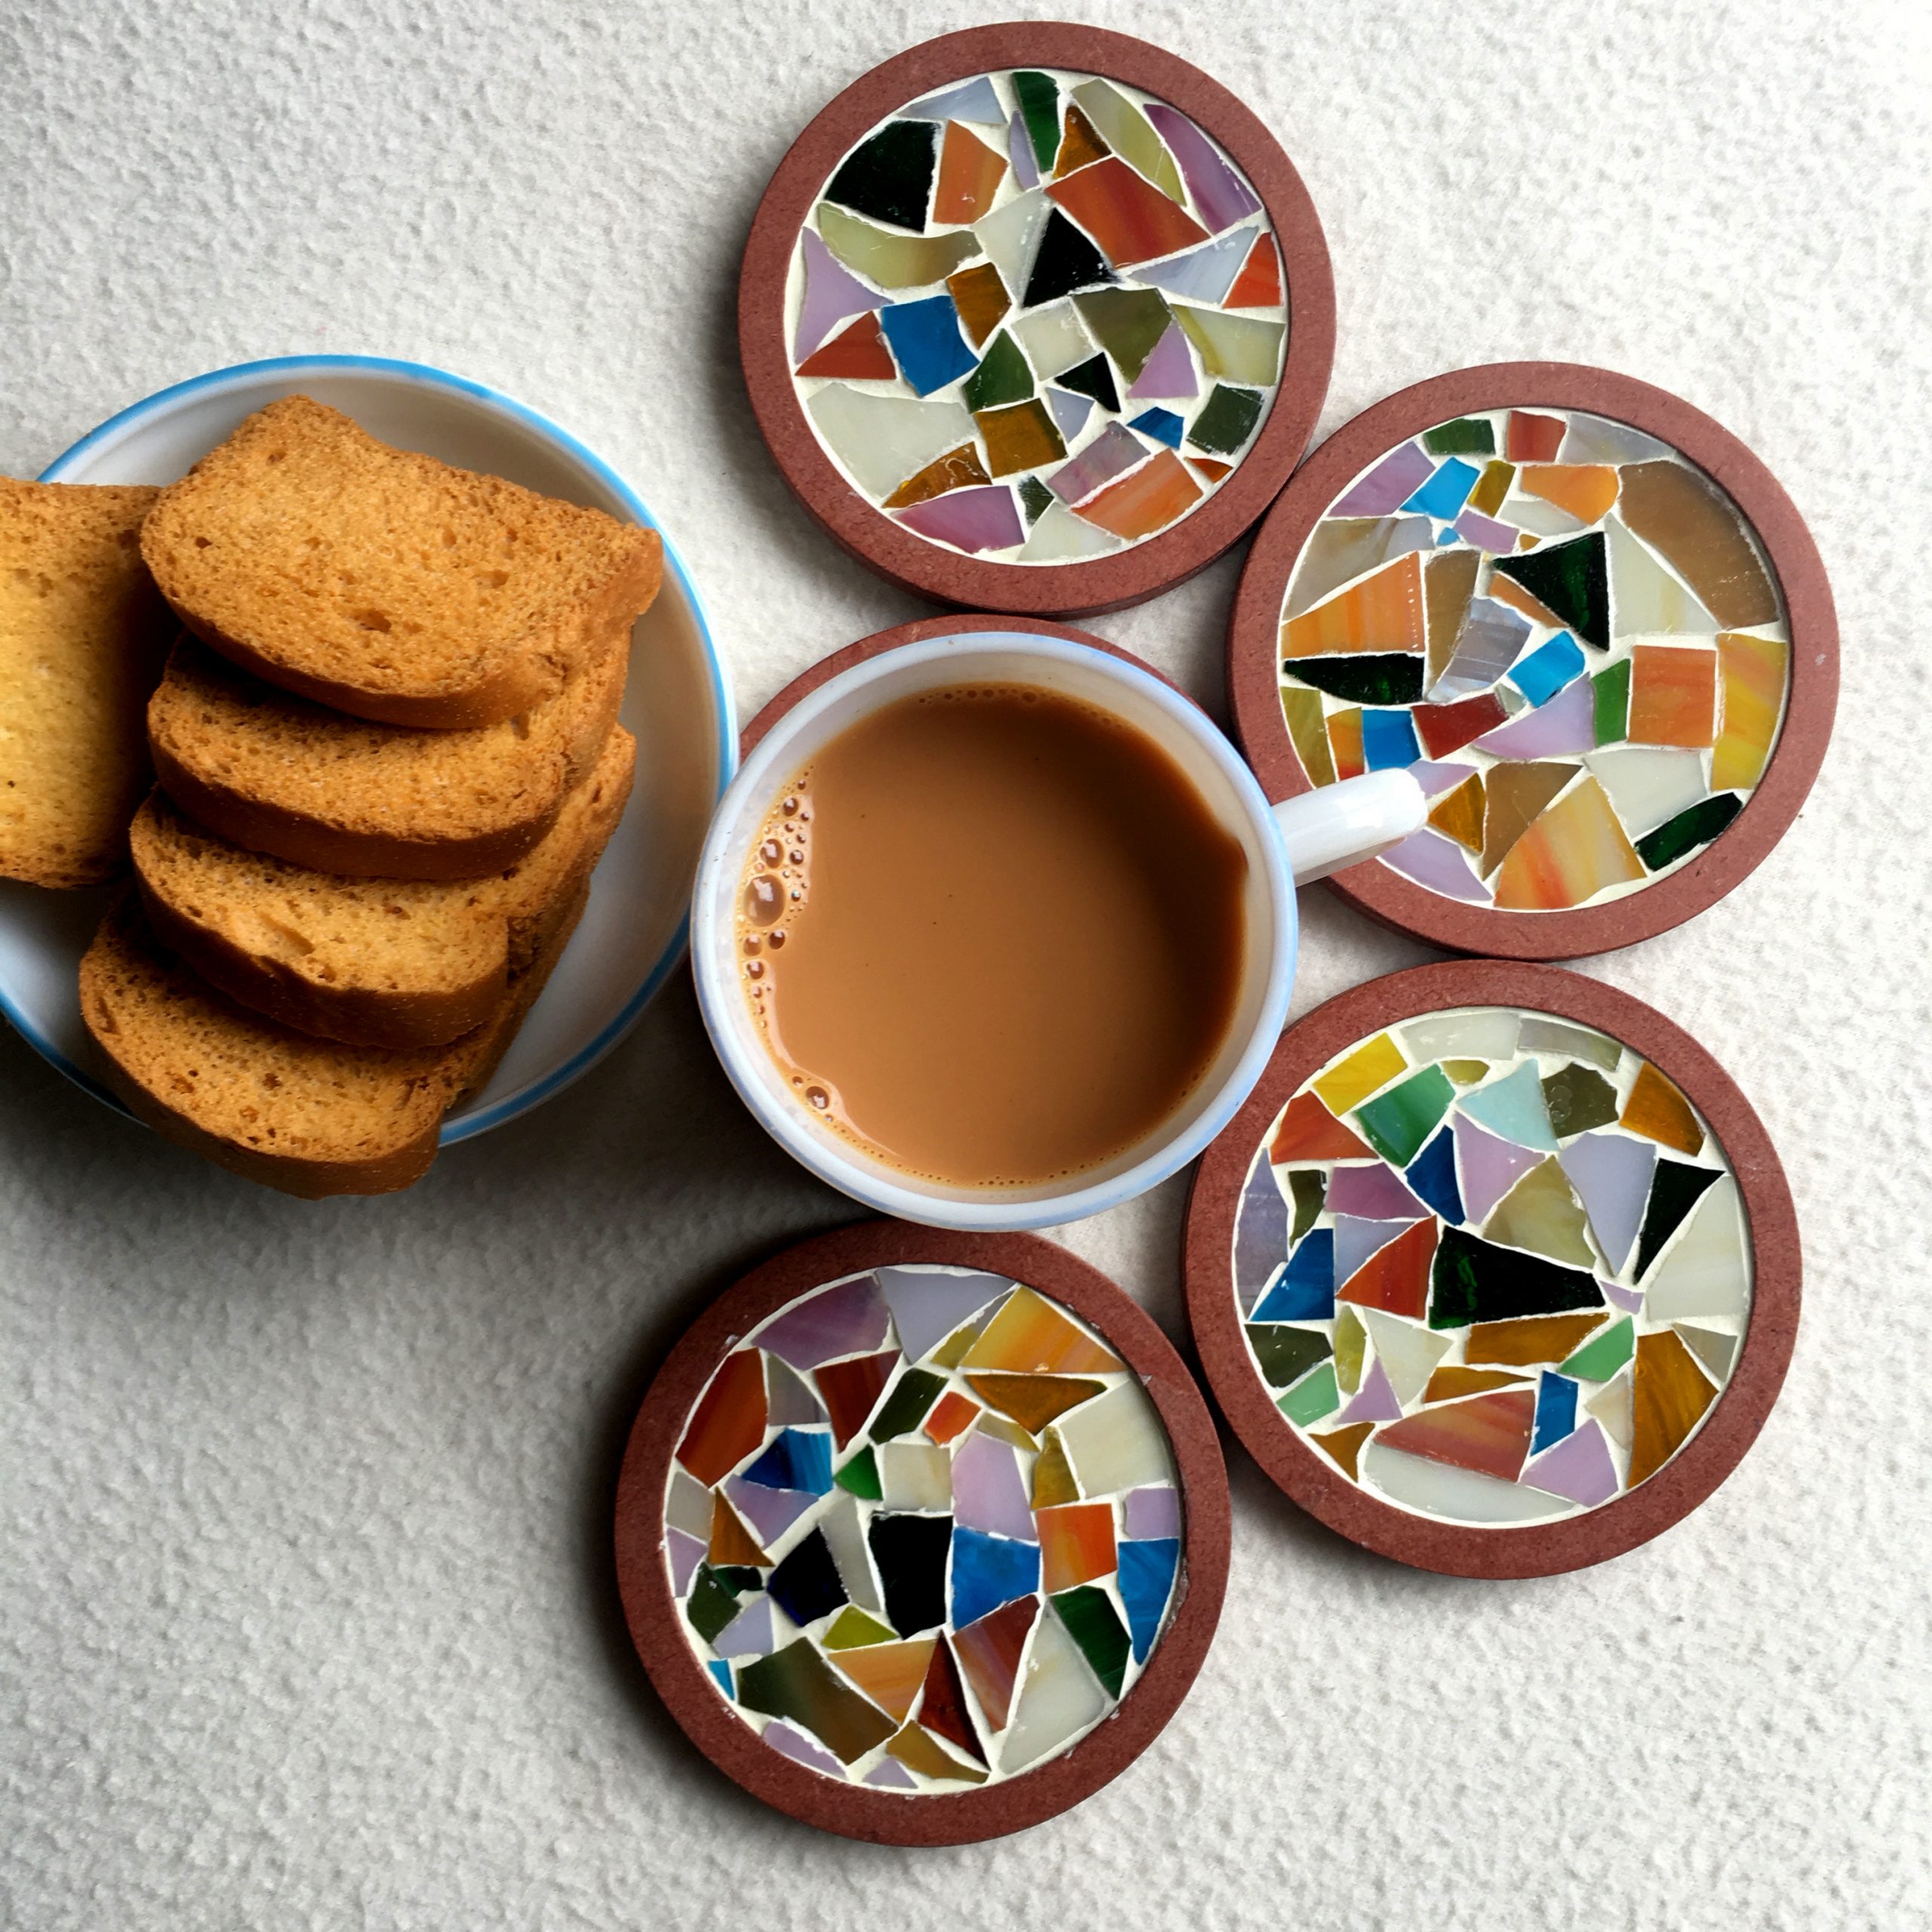 Five cheap ways to give your home a personal touch and craft your own drink coasters